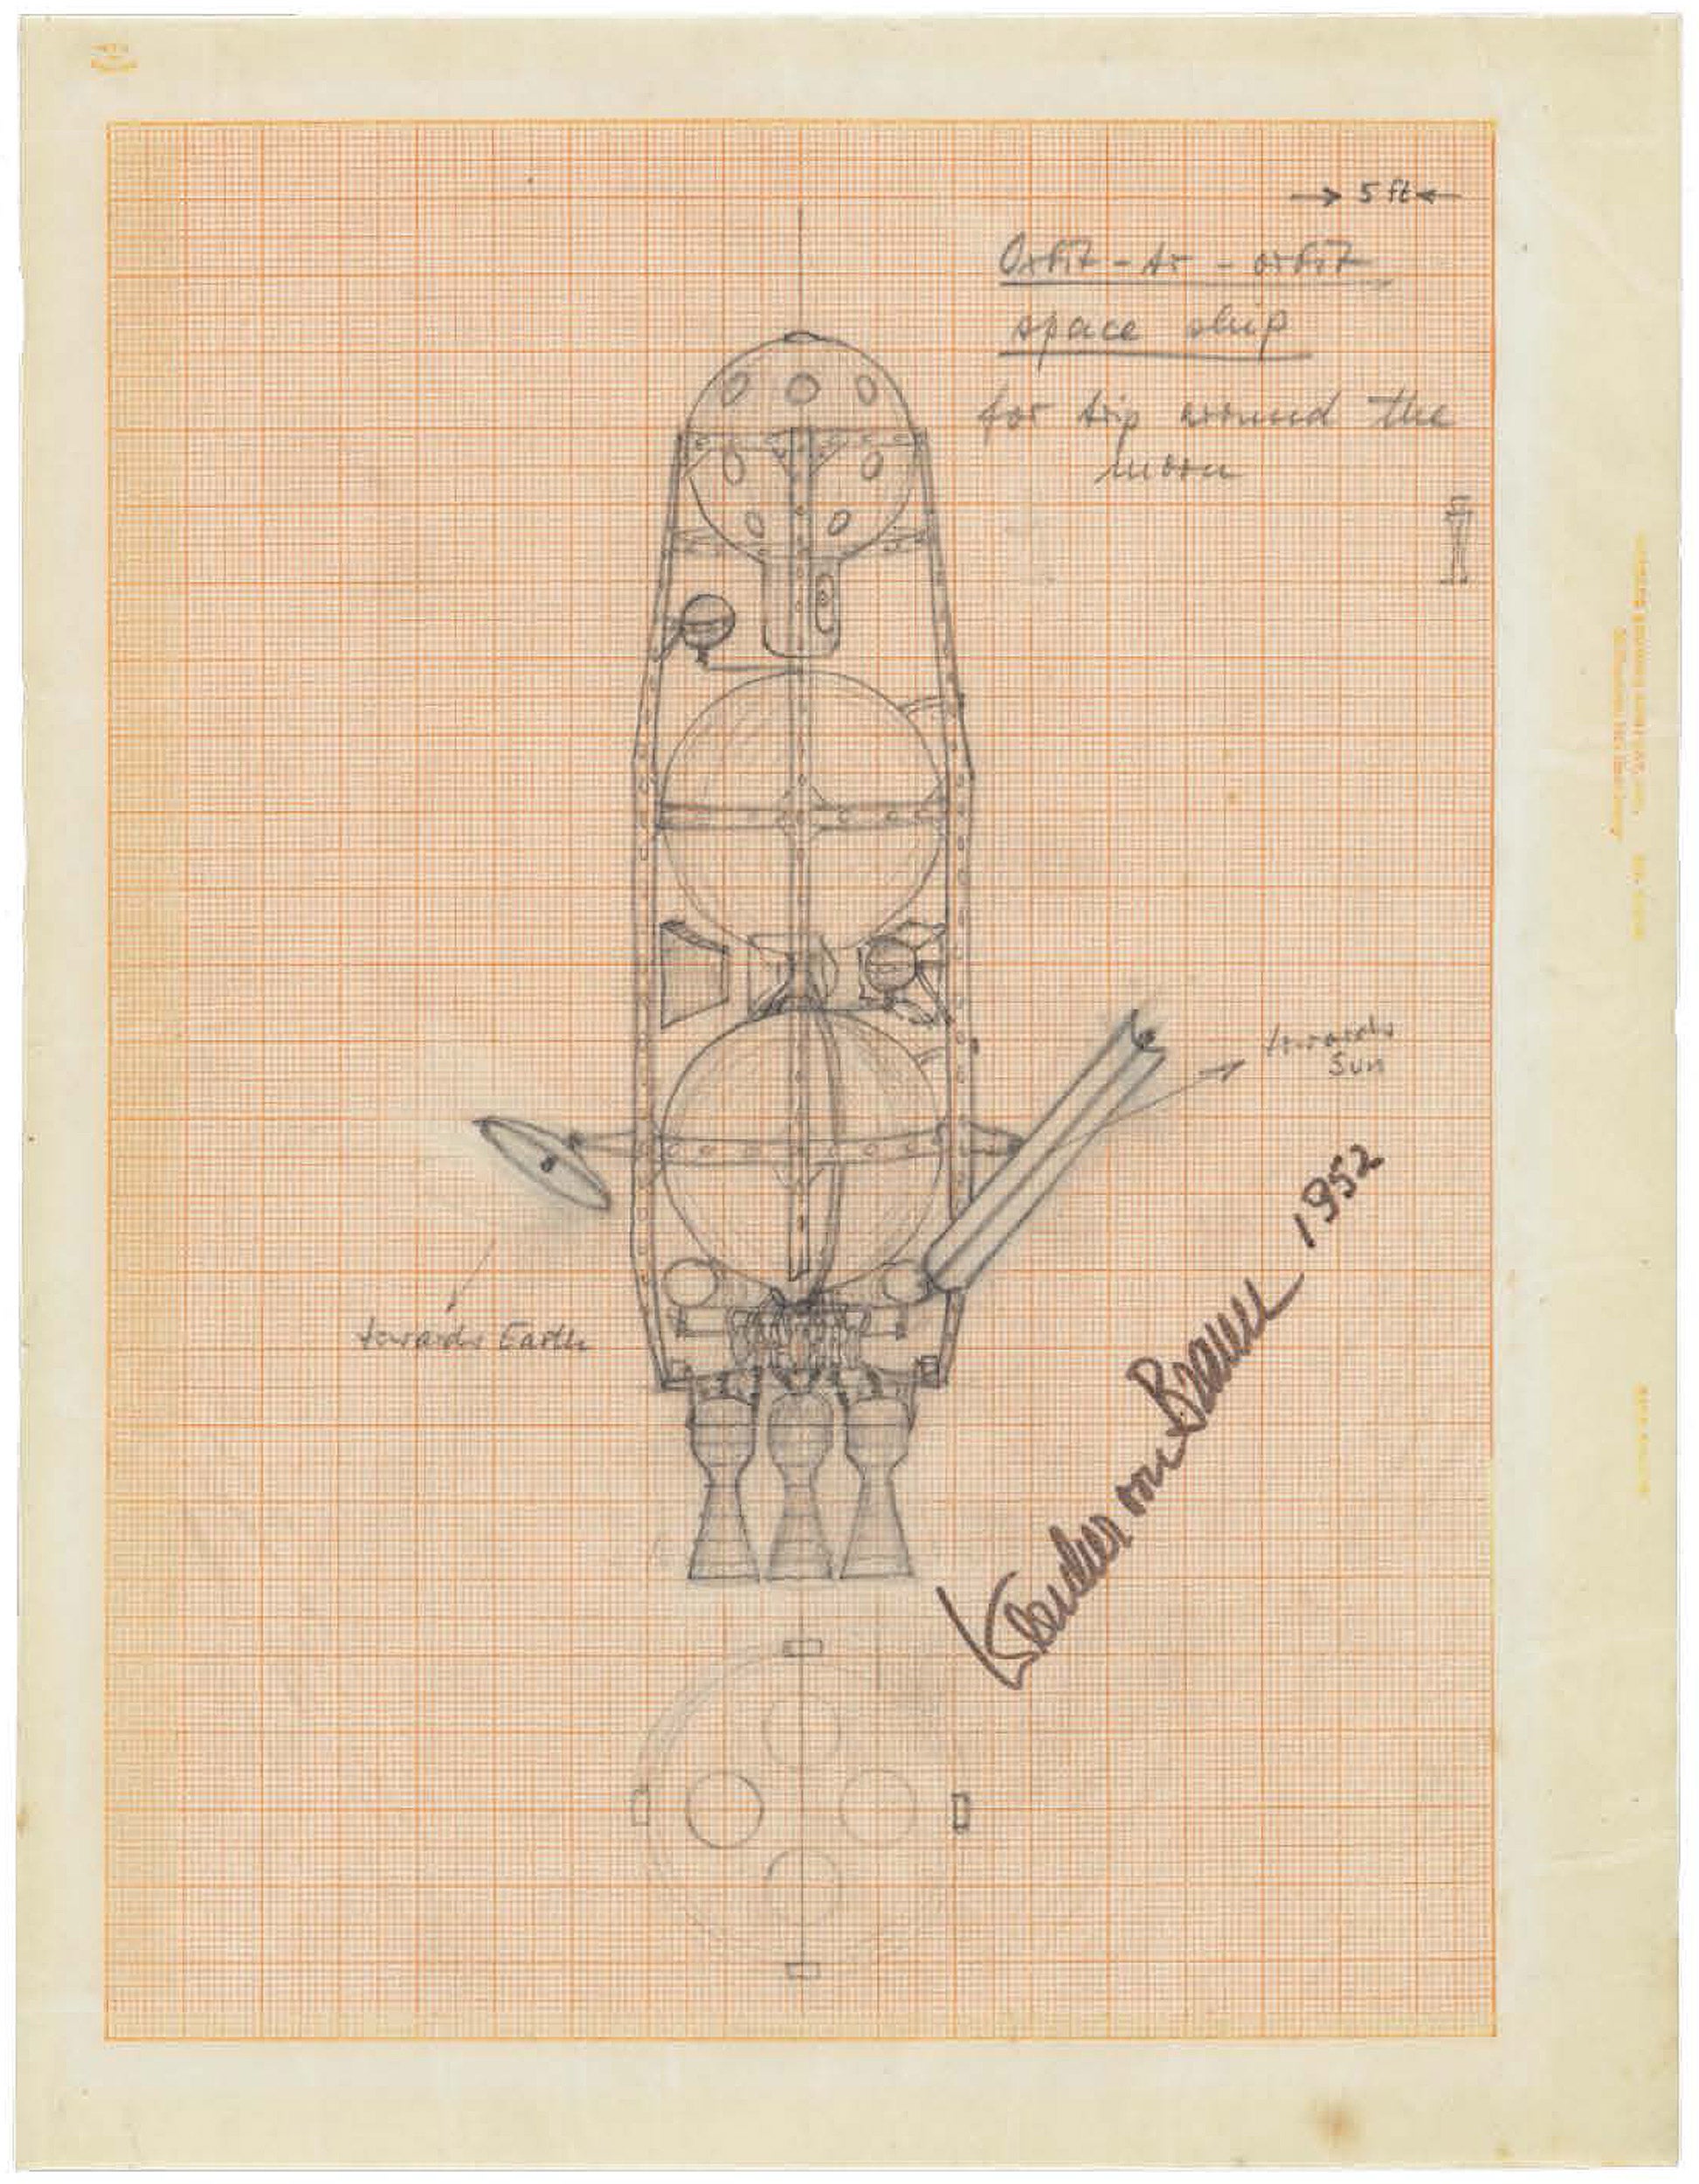 An early rocket drawing by space architect Wernher von Braun.